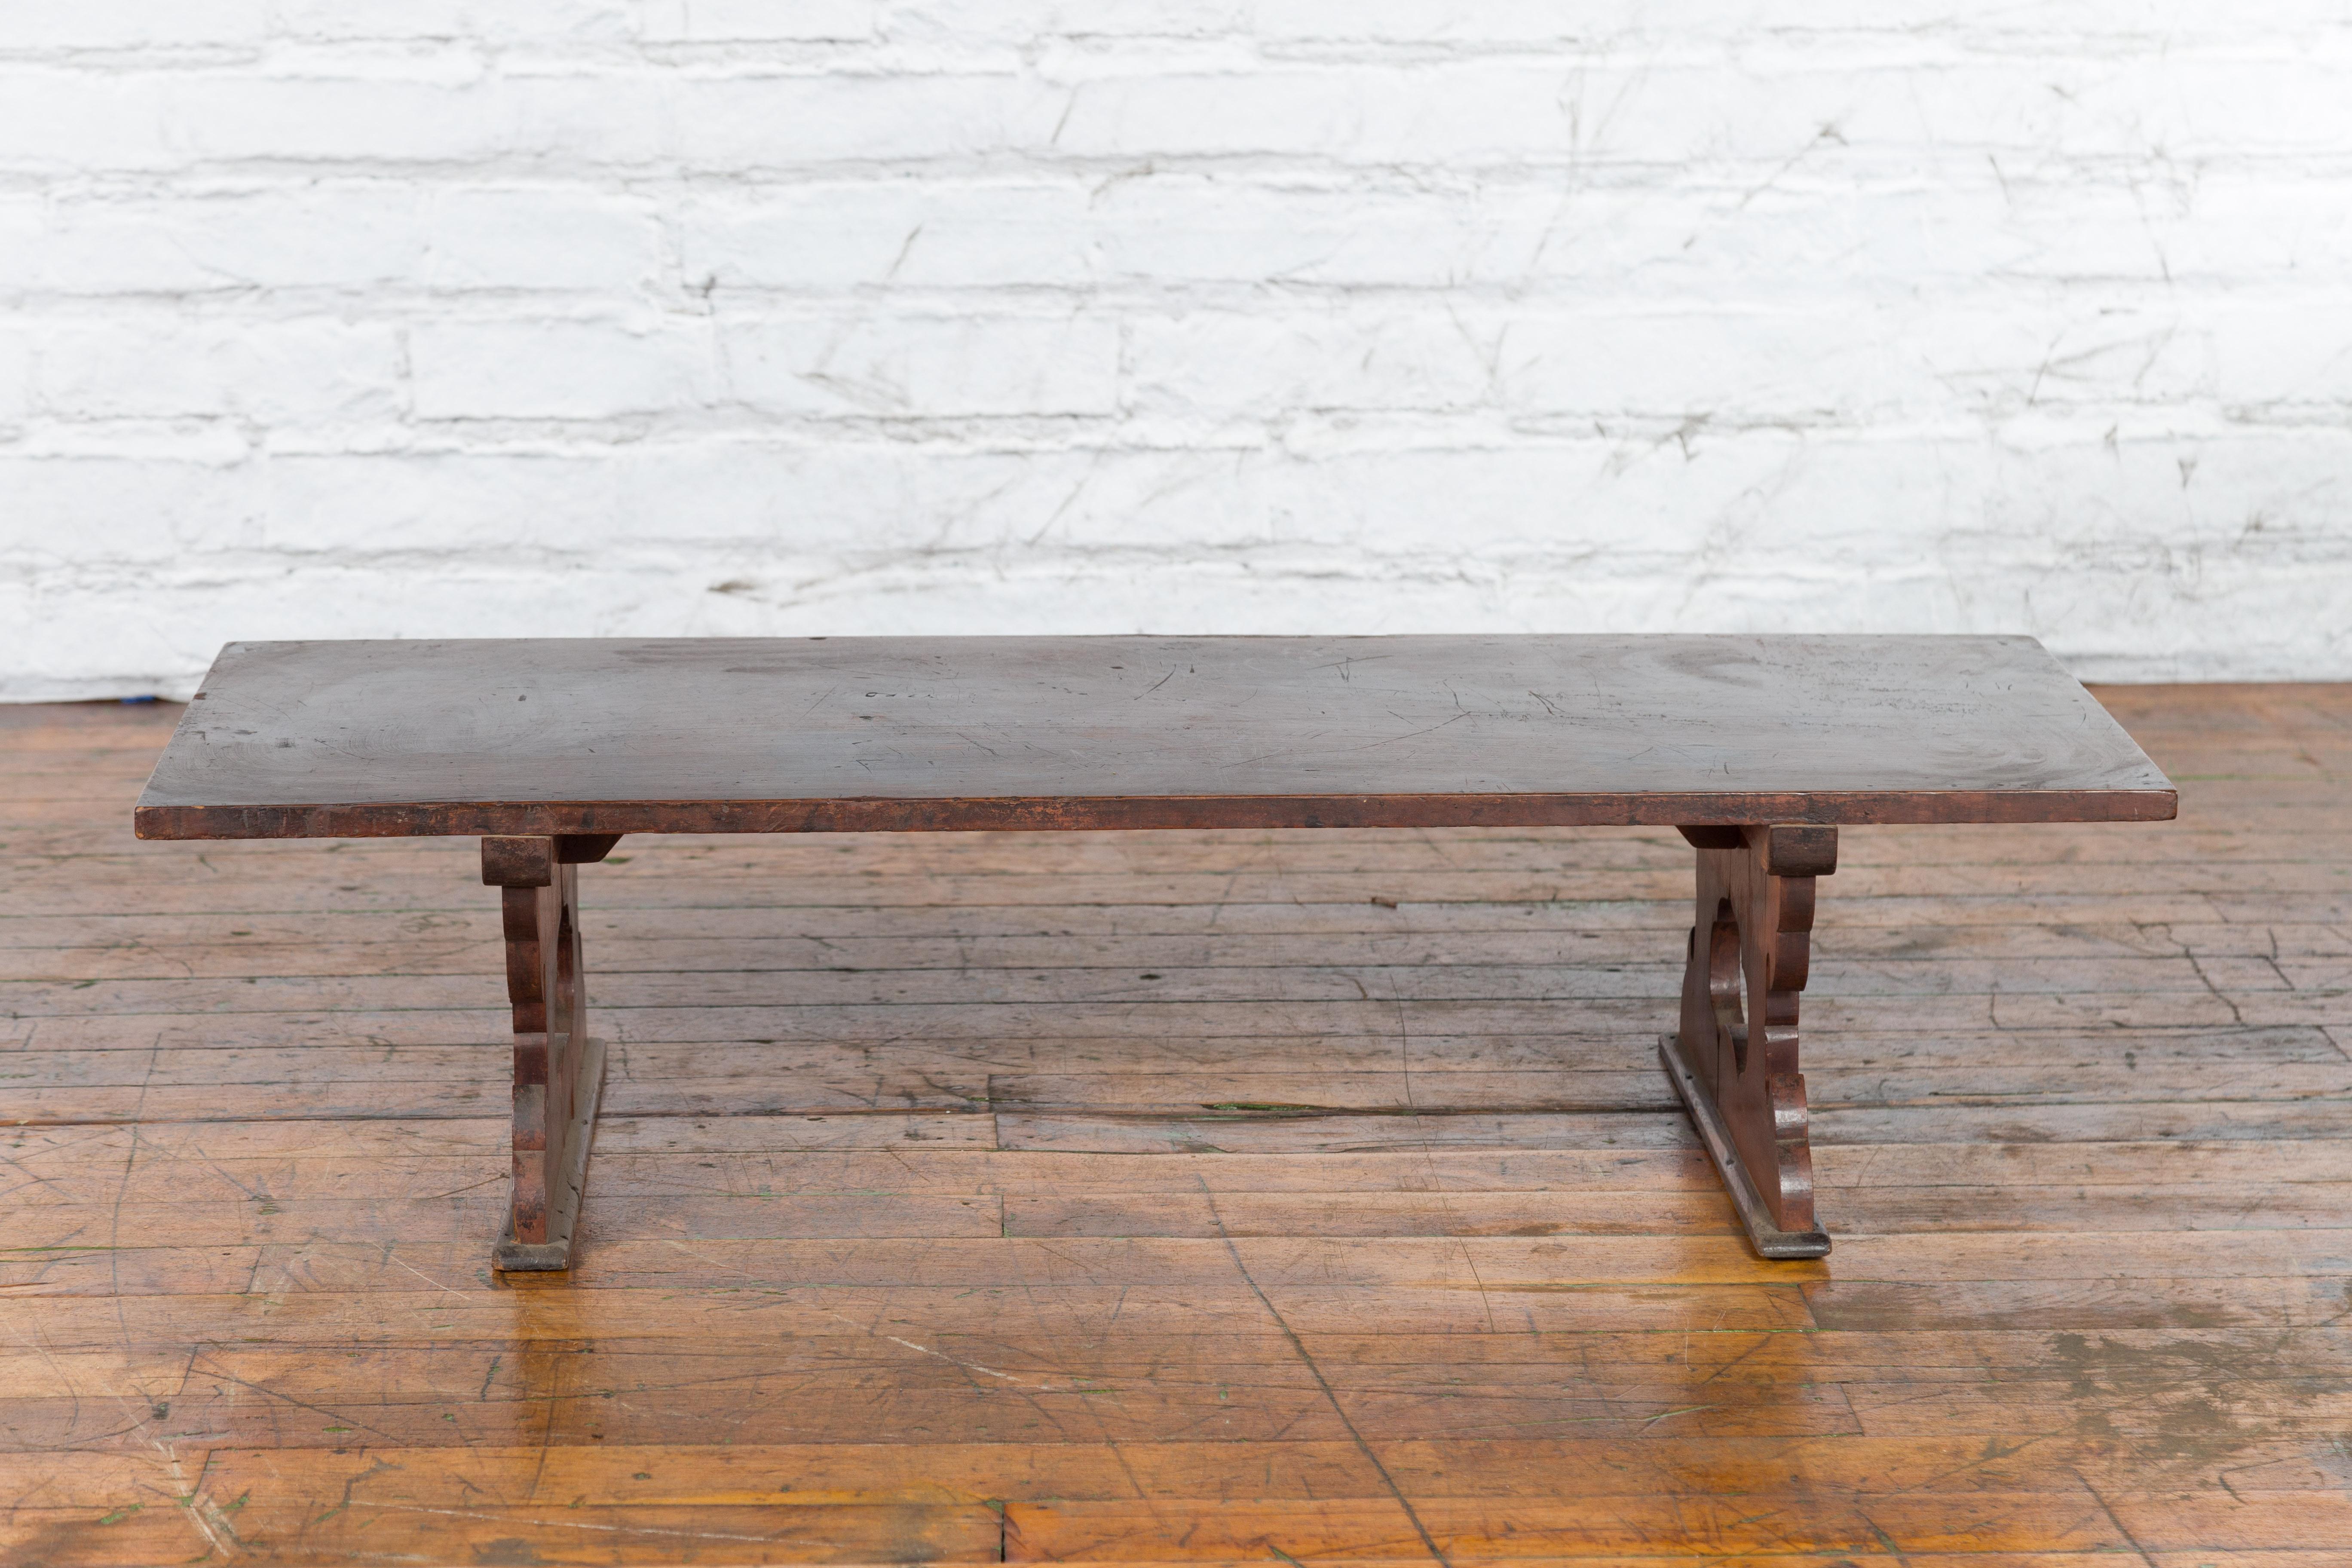 Japanese Meiji Period Low Table with Recessed Legs and Open Carved Cutout Legs For Sale 3